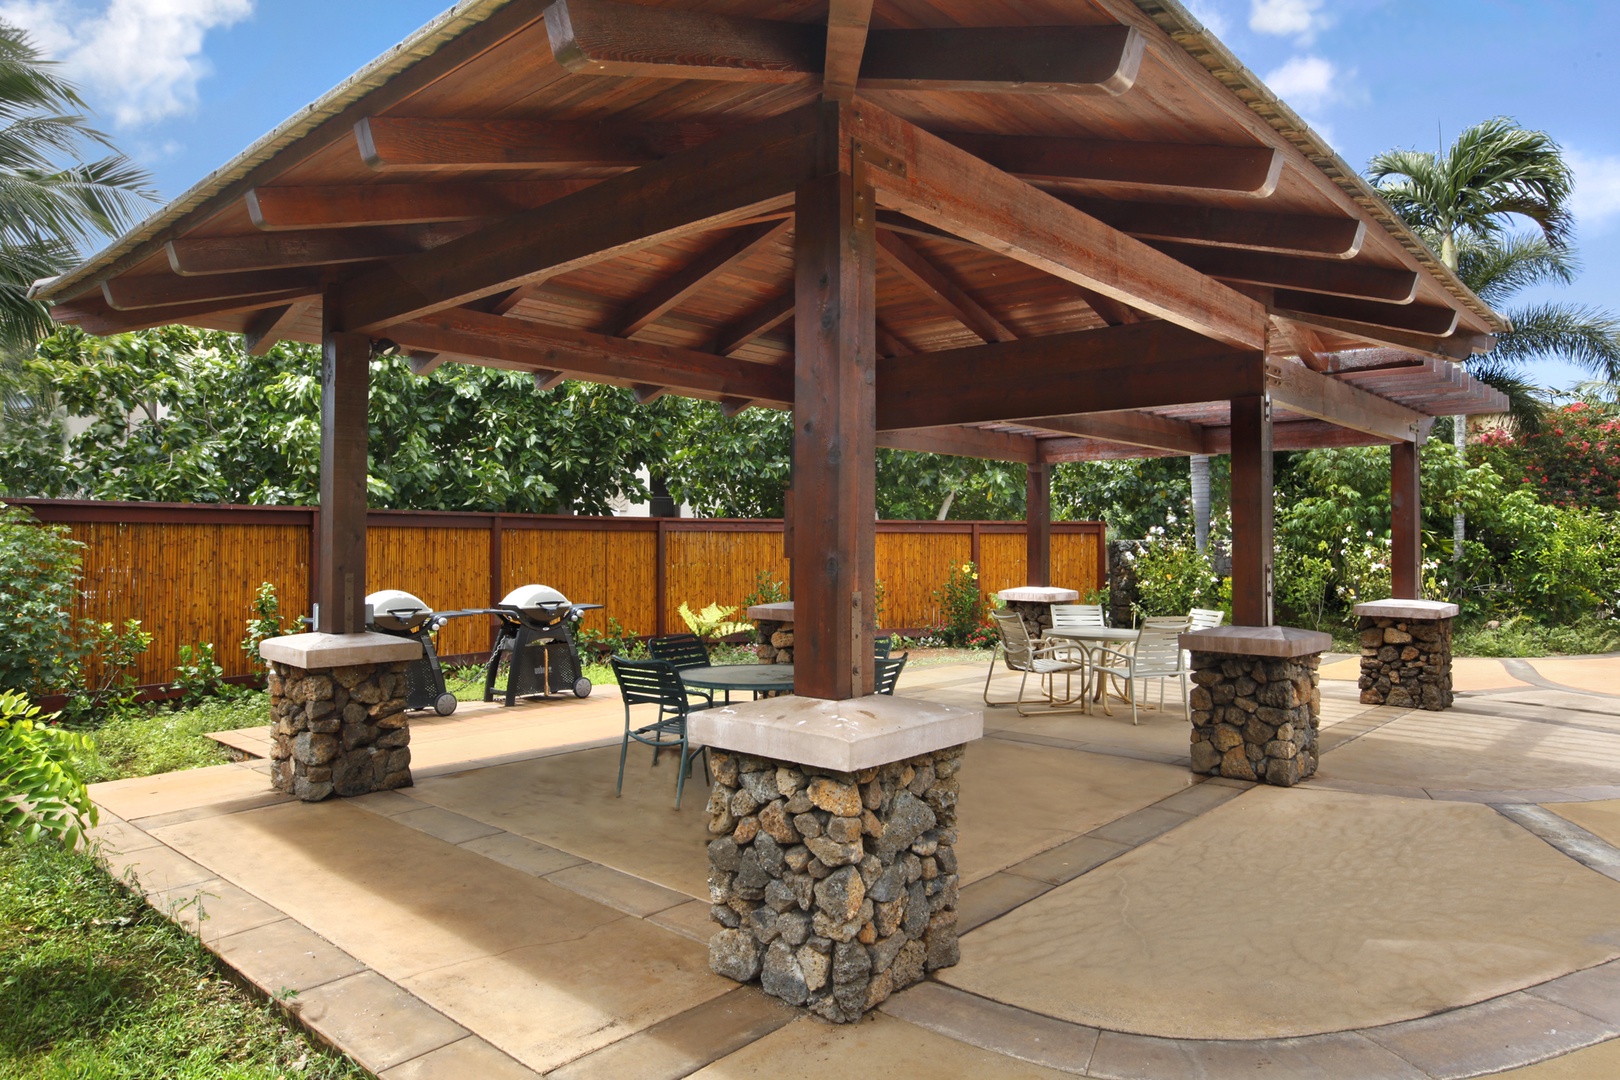 Koloa Vacation Rentals, Waikomo Streams 203 - Grill and Gather: the BBQ area is a delightful space for outdoor cooking and entertaining.